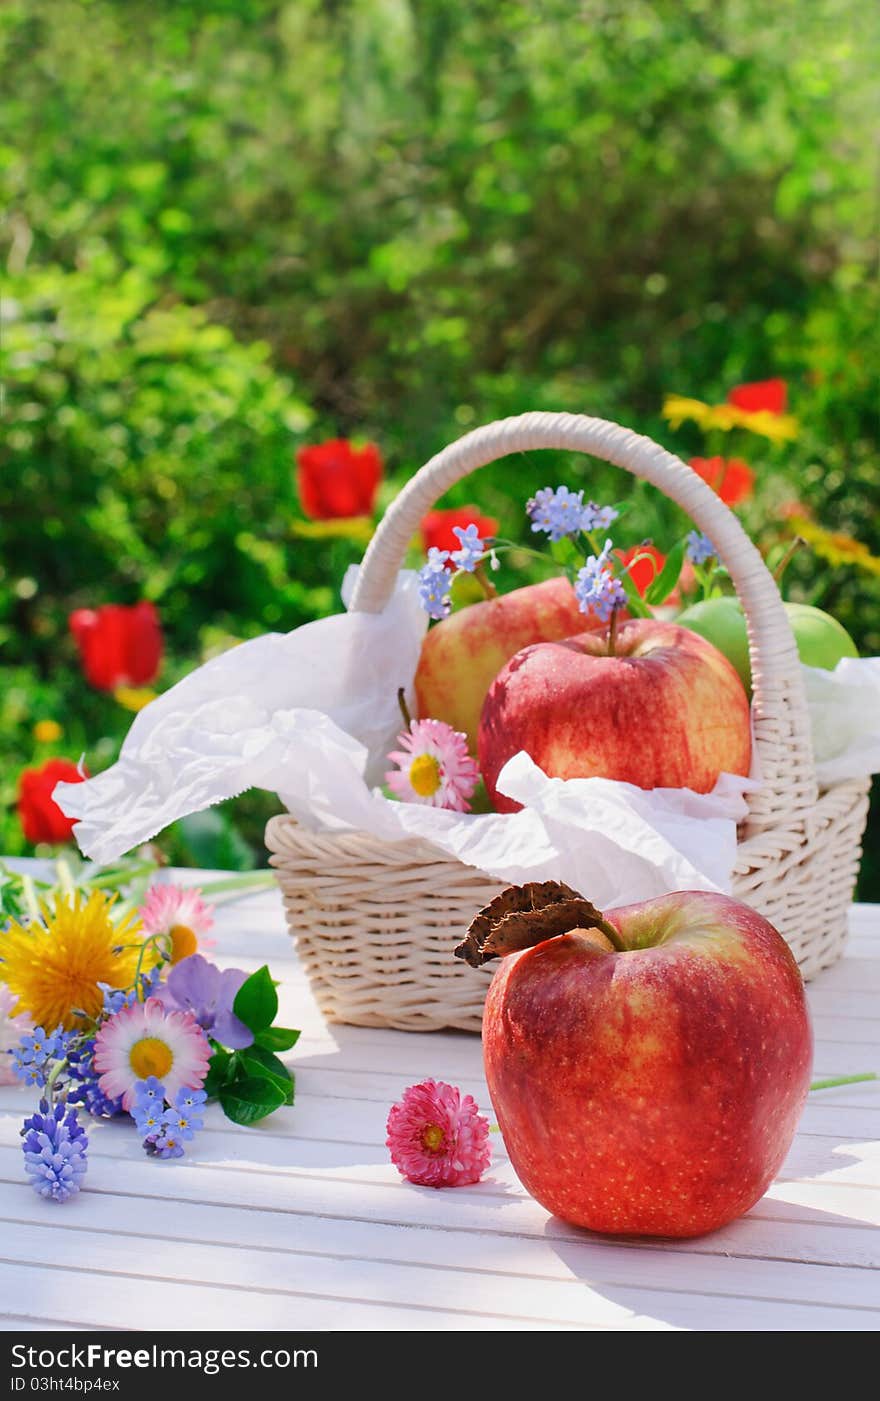 Red apples, flowers and basket on white garden table in sunny summer day. Red apples, flowers and basket on white garden table in sunny summer day